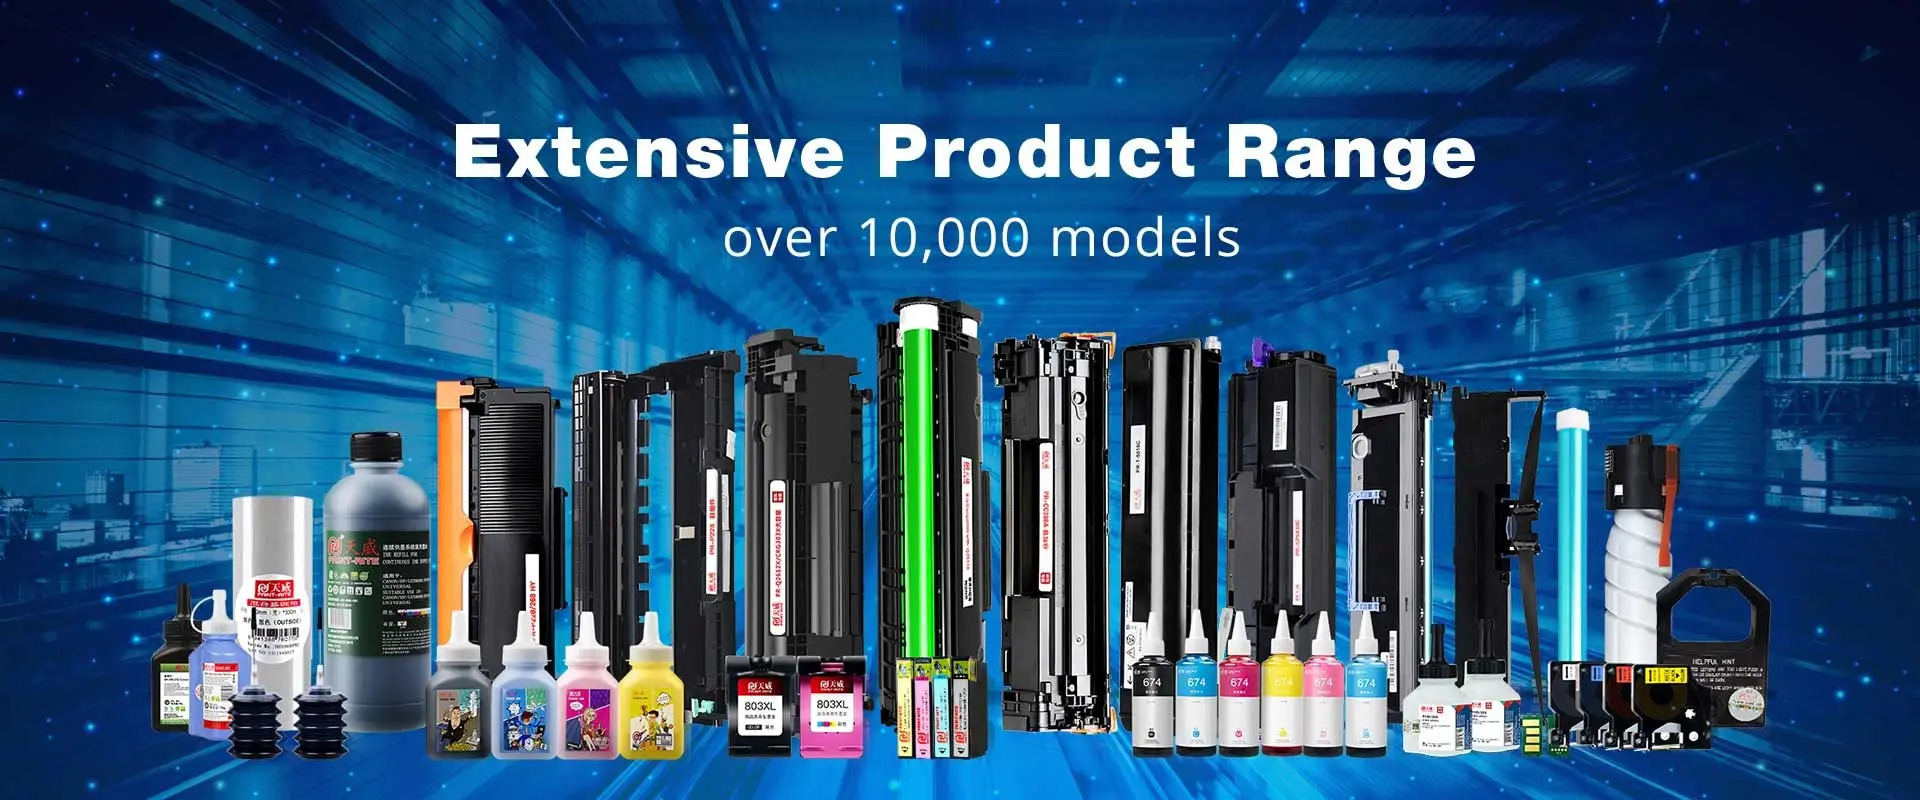 Extensive Printing Consumables Range over 10,000 models